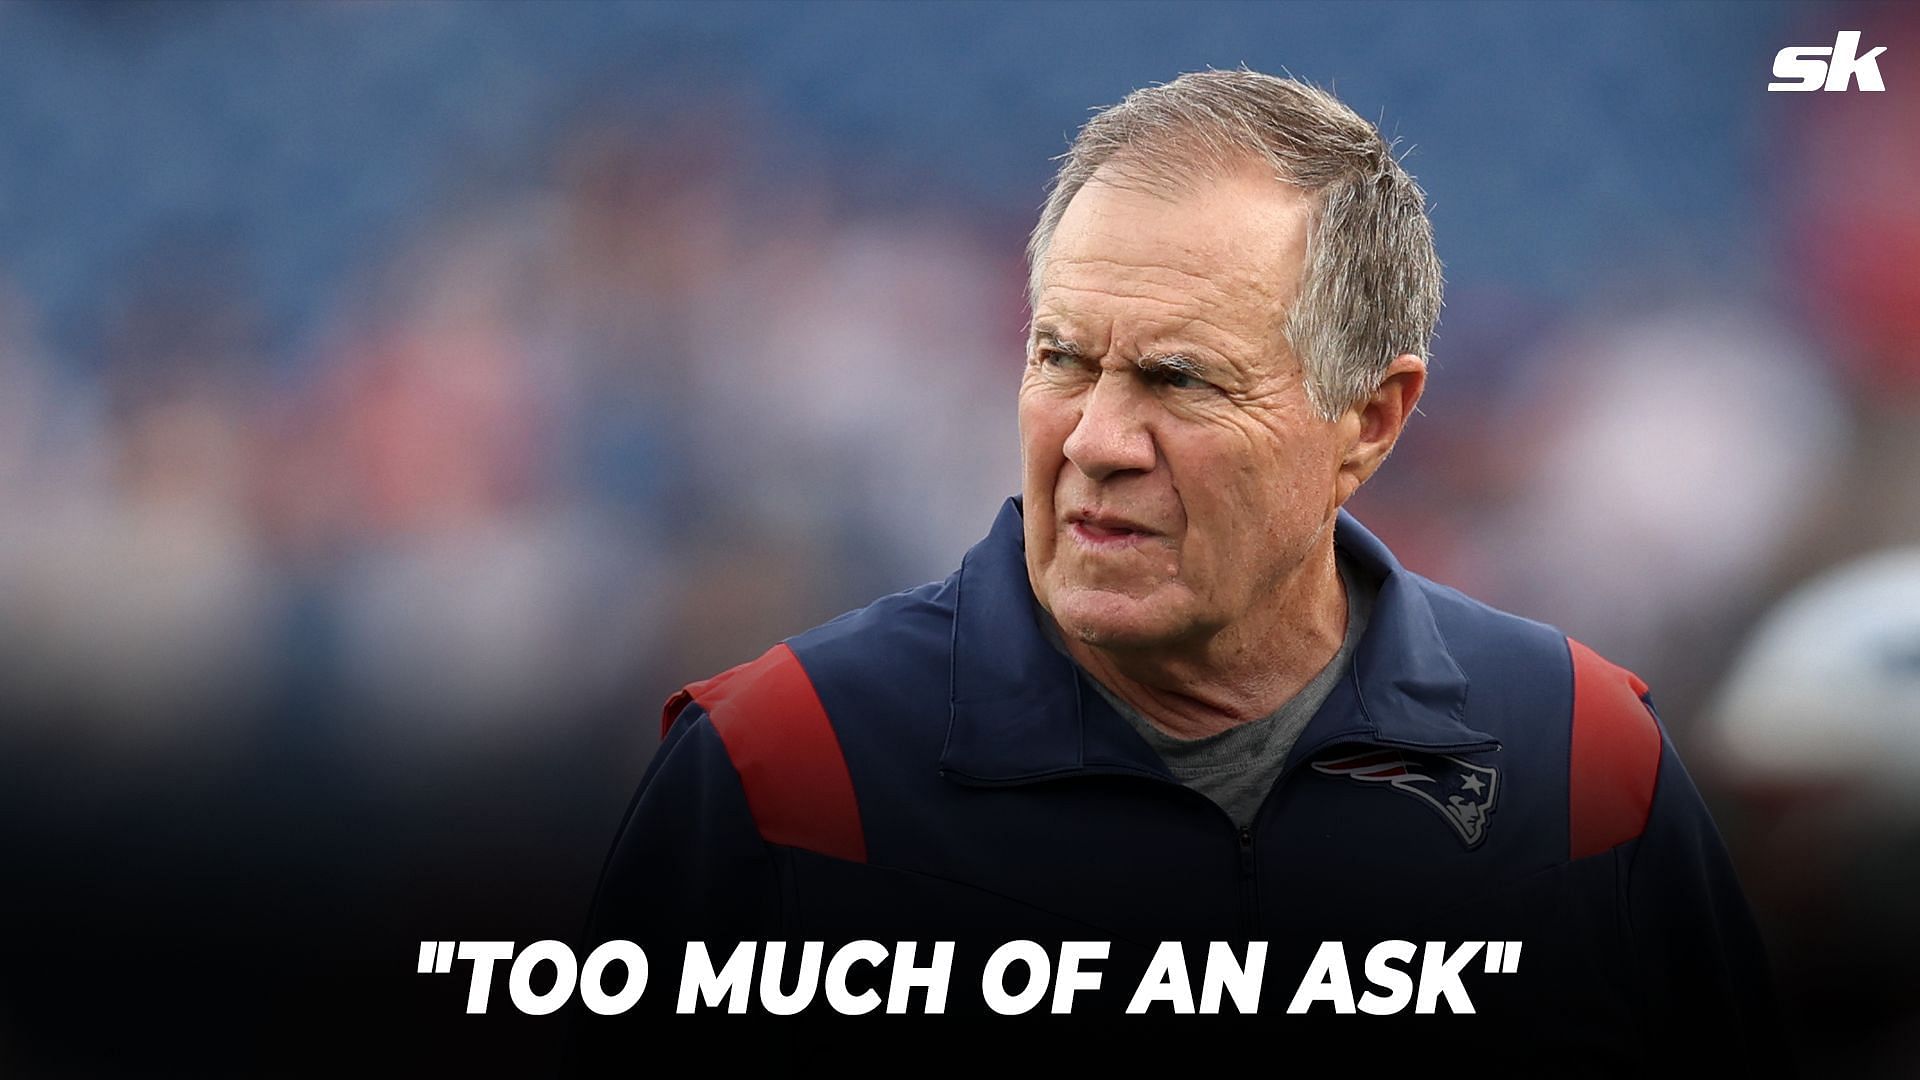 Is Bill Belichick dangerously overconfident, to the detriment of his team?